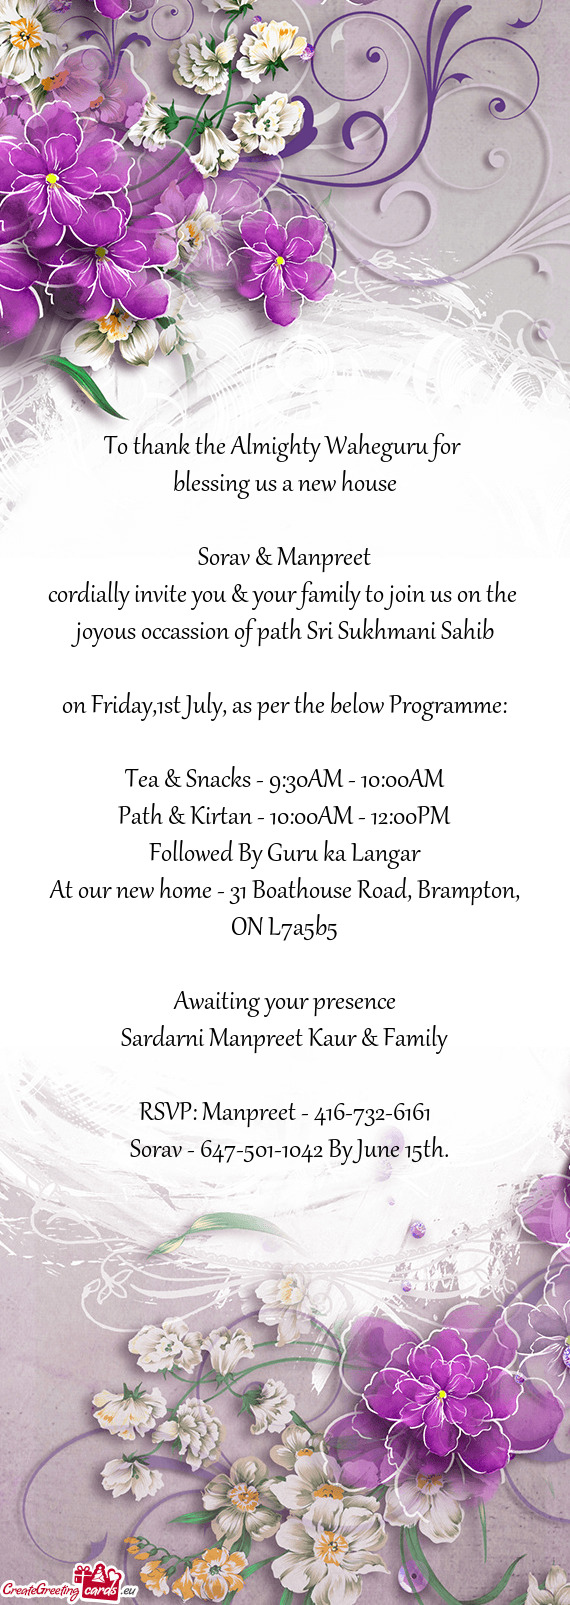 On Friday,1st July, as per the below Programme